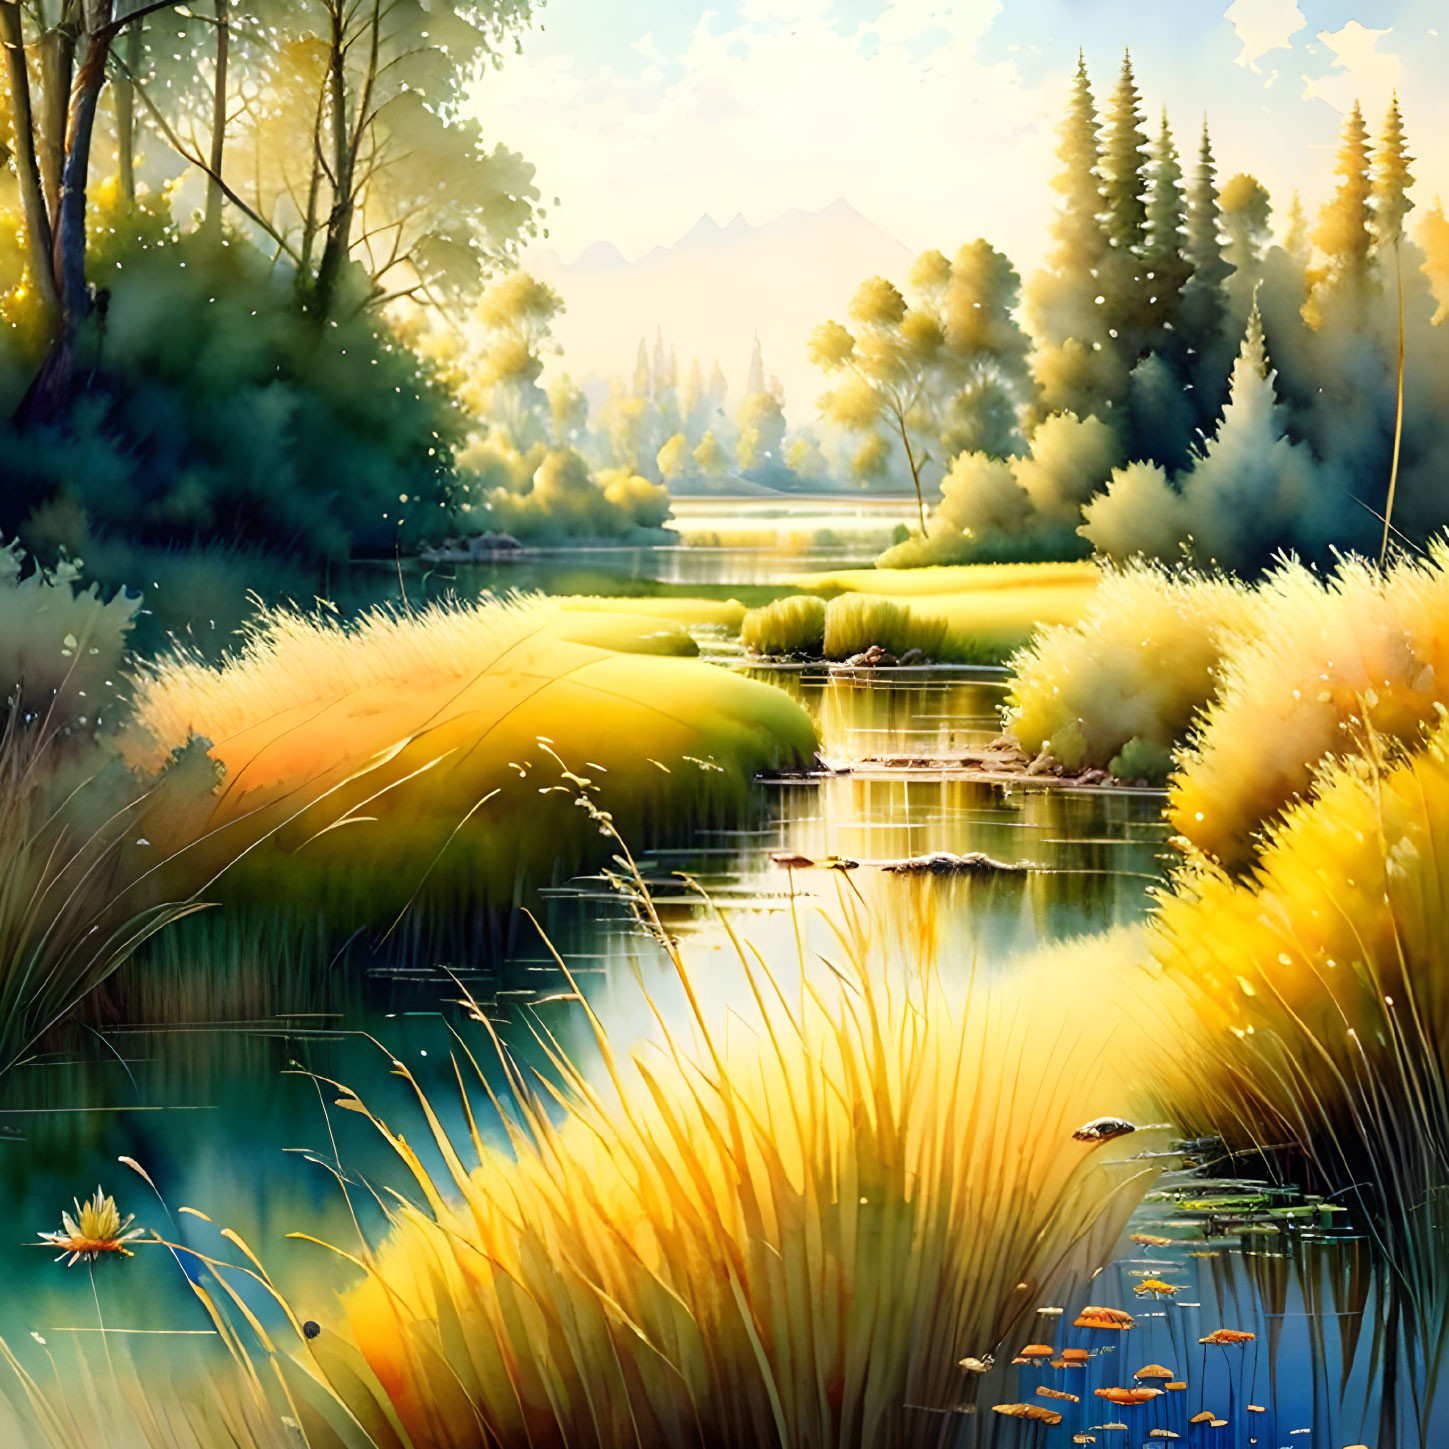 Tranquil landscape painting of serene lake, lush foliage, trees, distant mountains, and warm sunlight